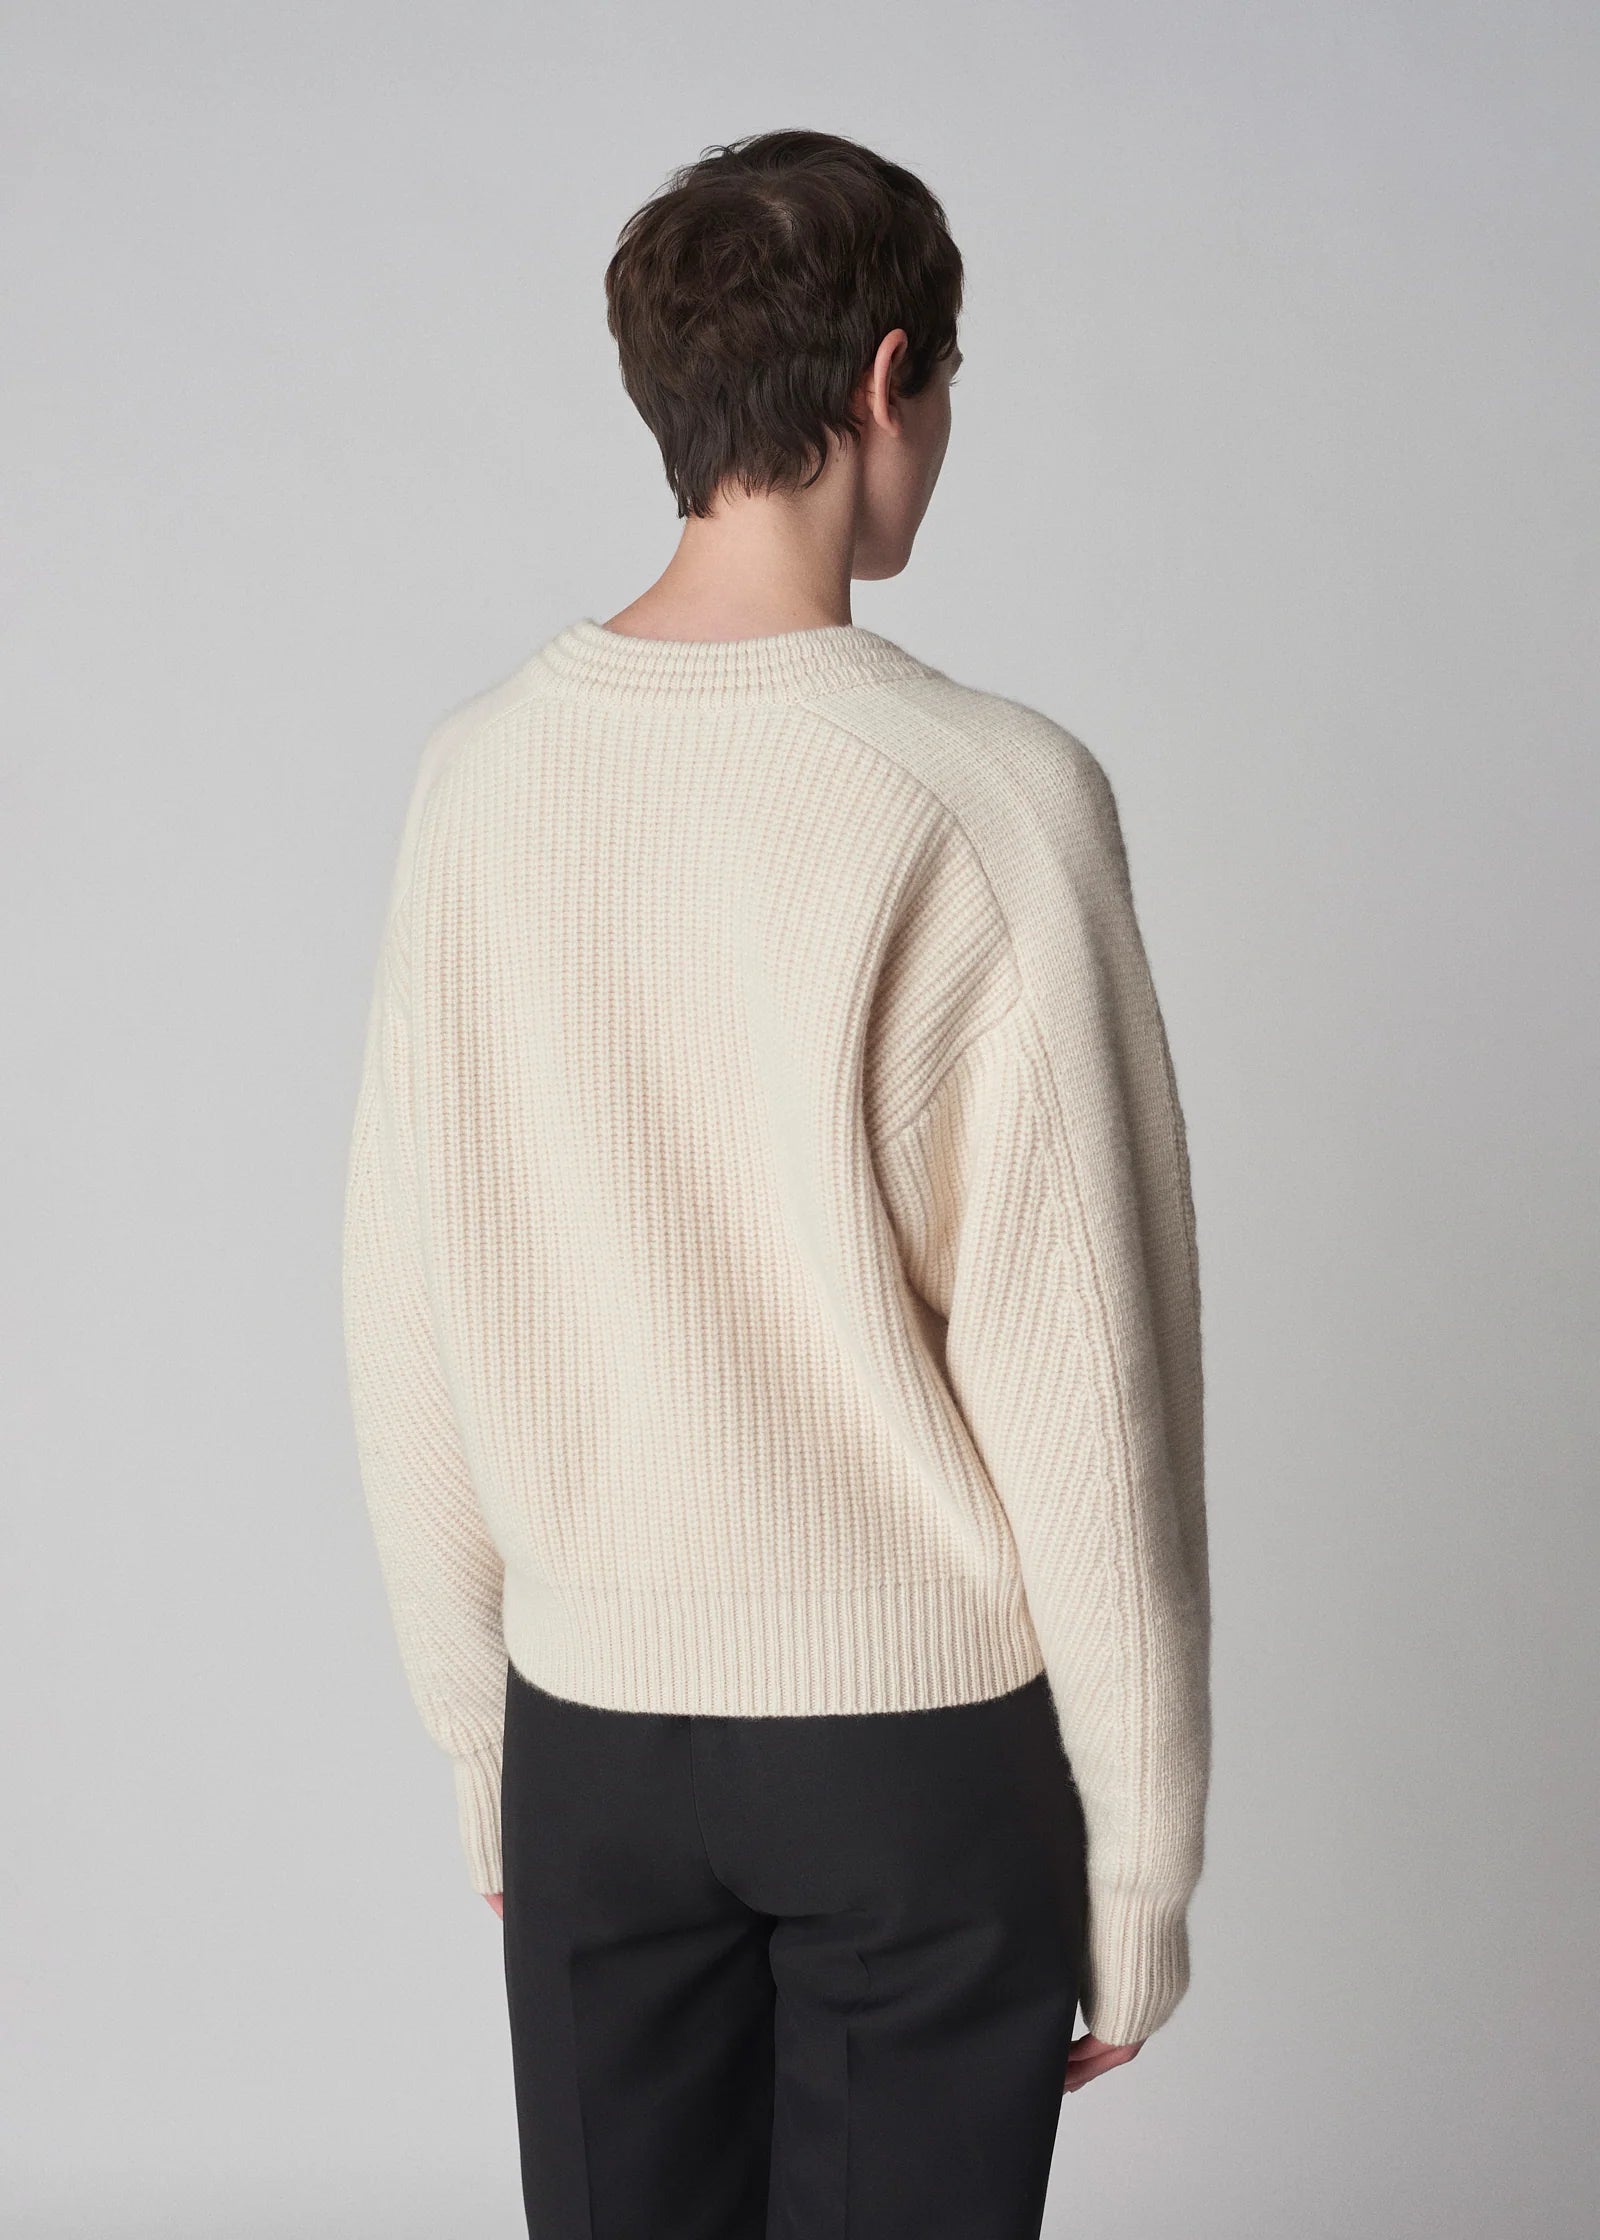 CO V-Neck Sweater in Cashmere